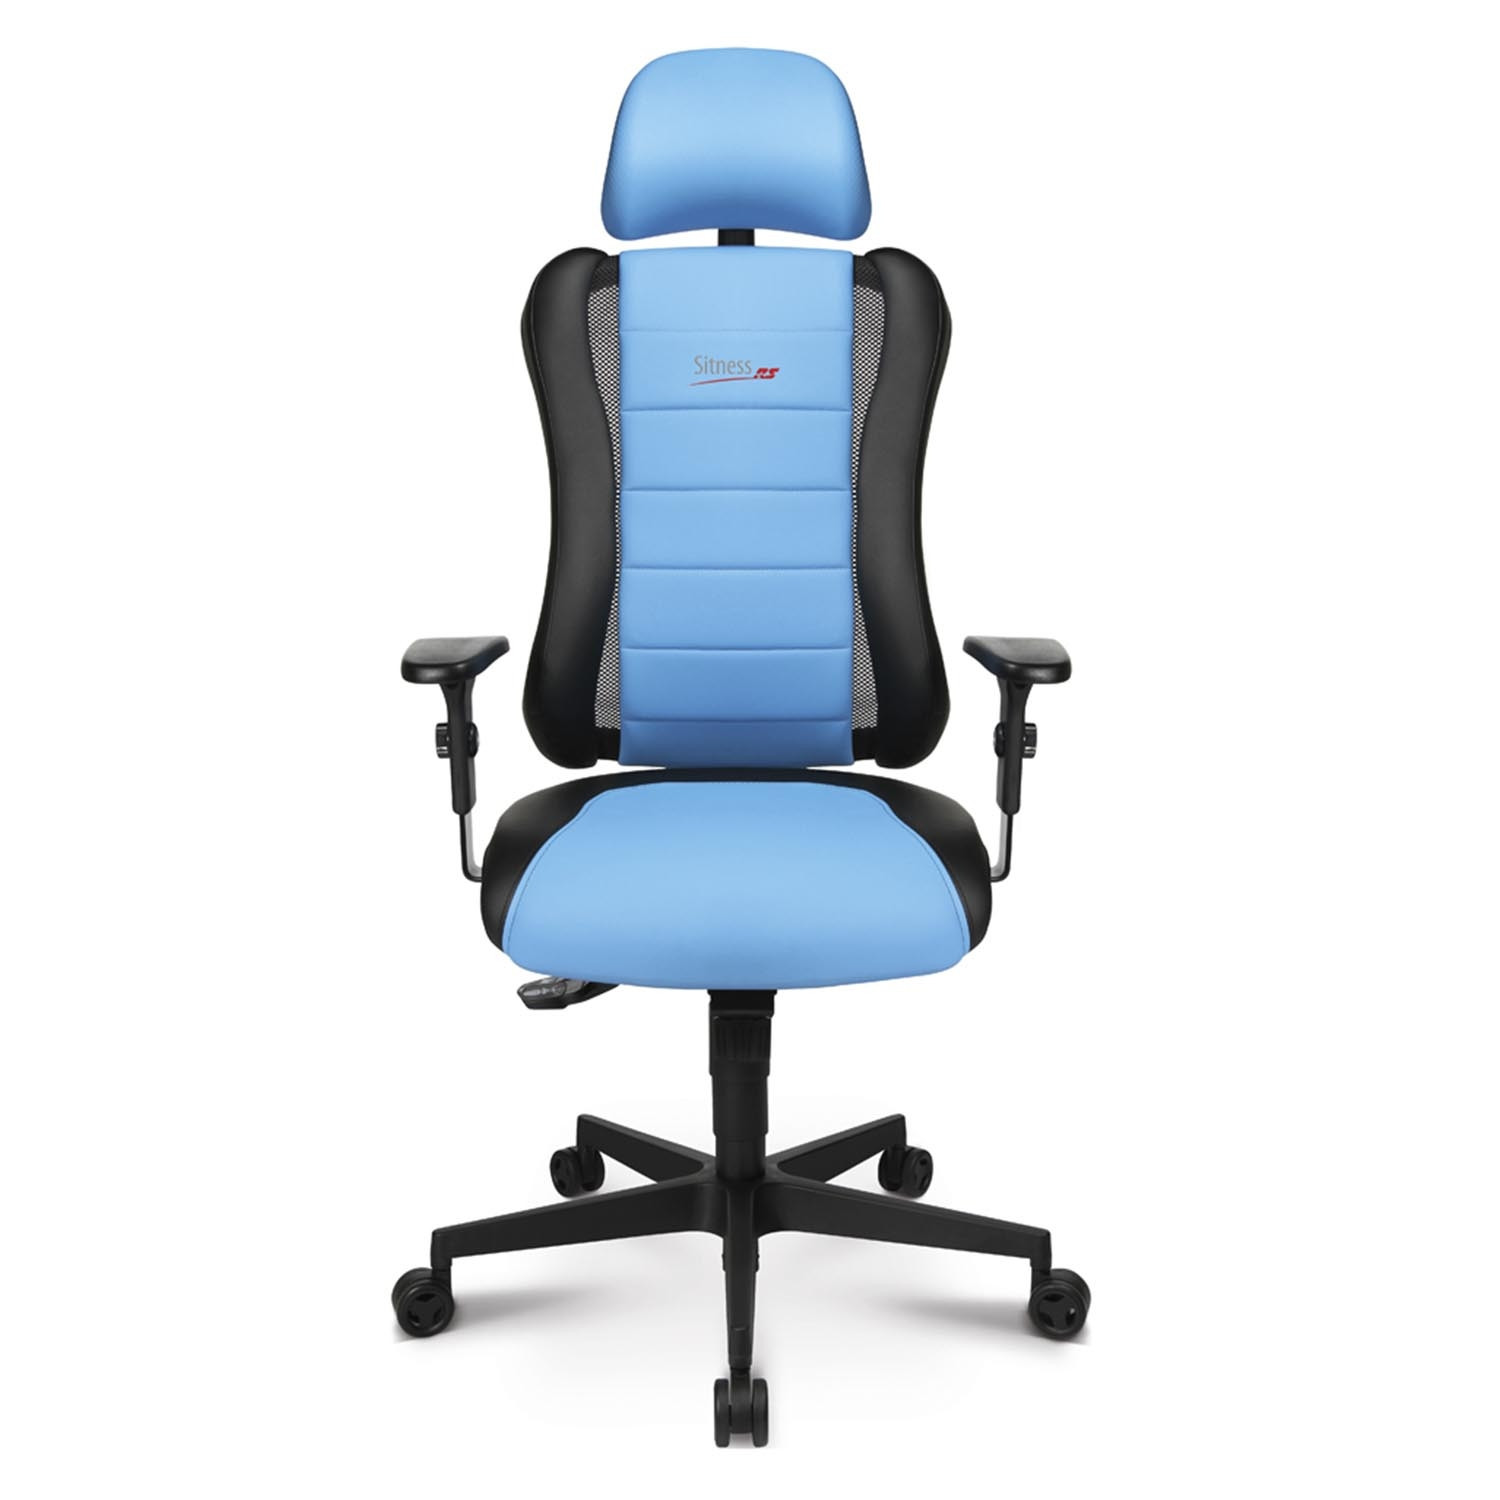 Sitness Racer Chair In Blue